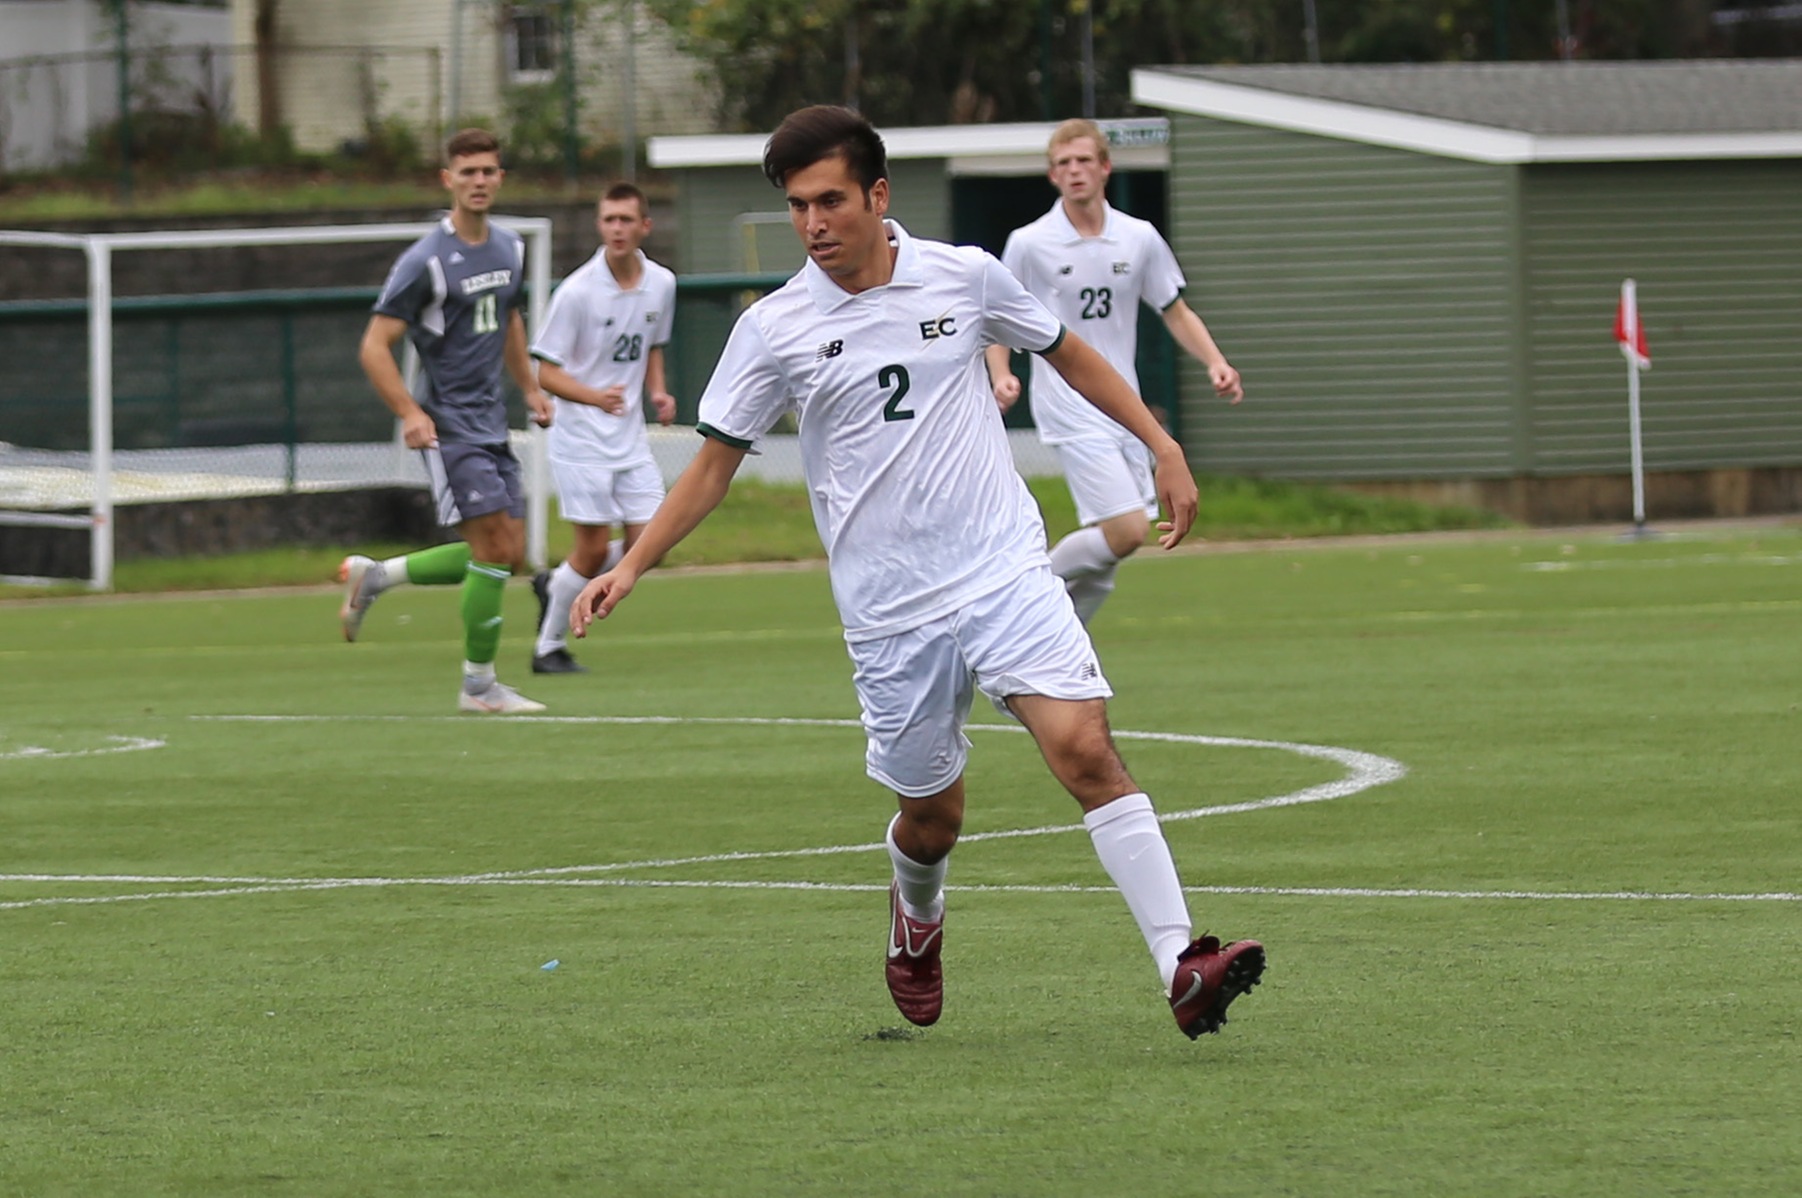 Men’s Soccer Tripped Up At Home In NECC Opener